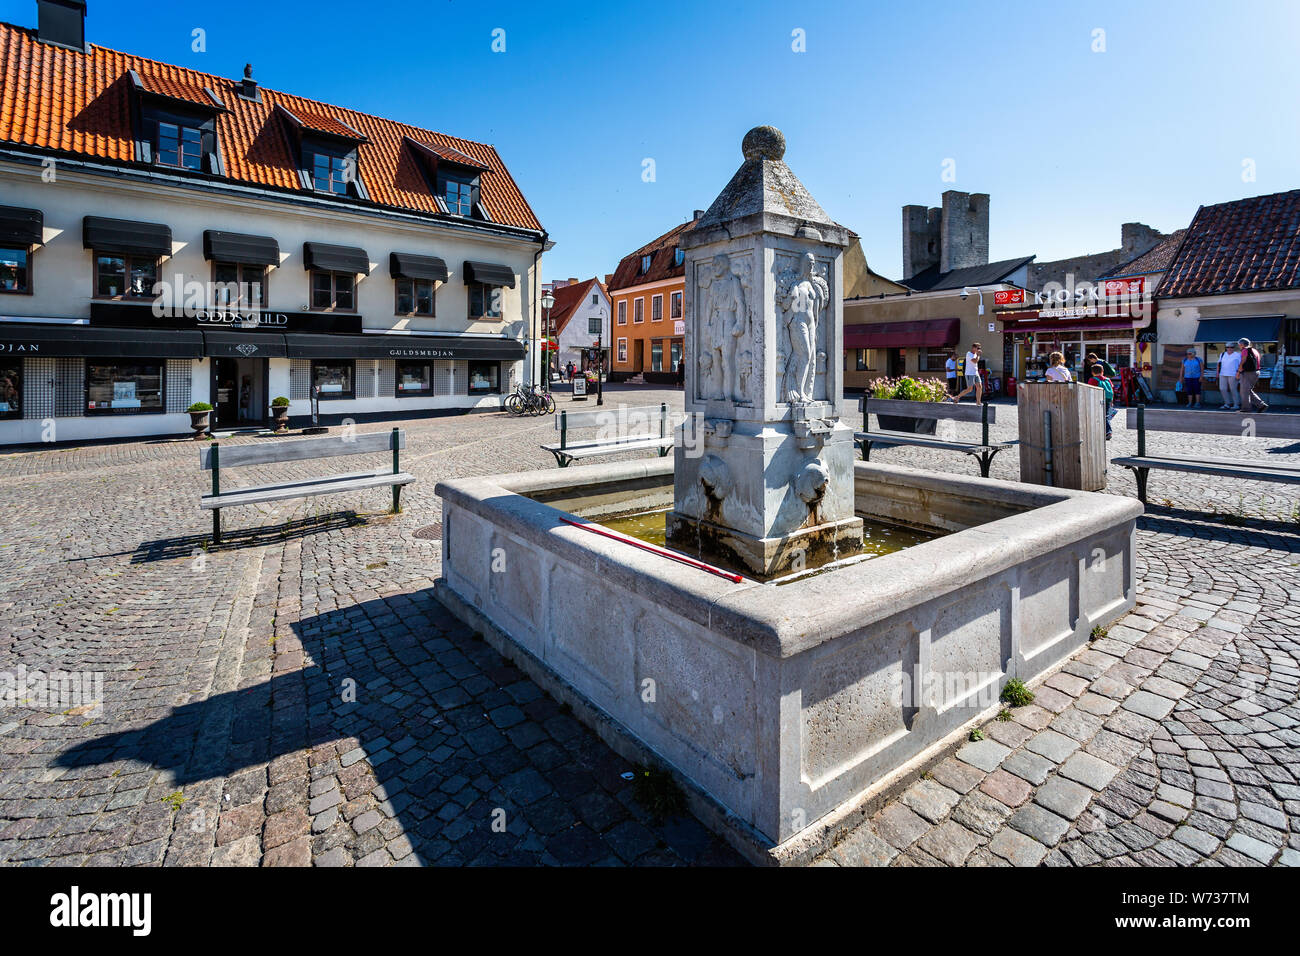 Small town fountain in the centre of the Hanseatic town of Visby, Gotland, Sweden on 20 July 2019 Stock Photo